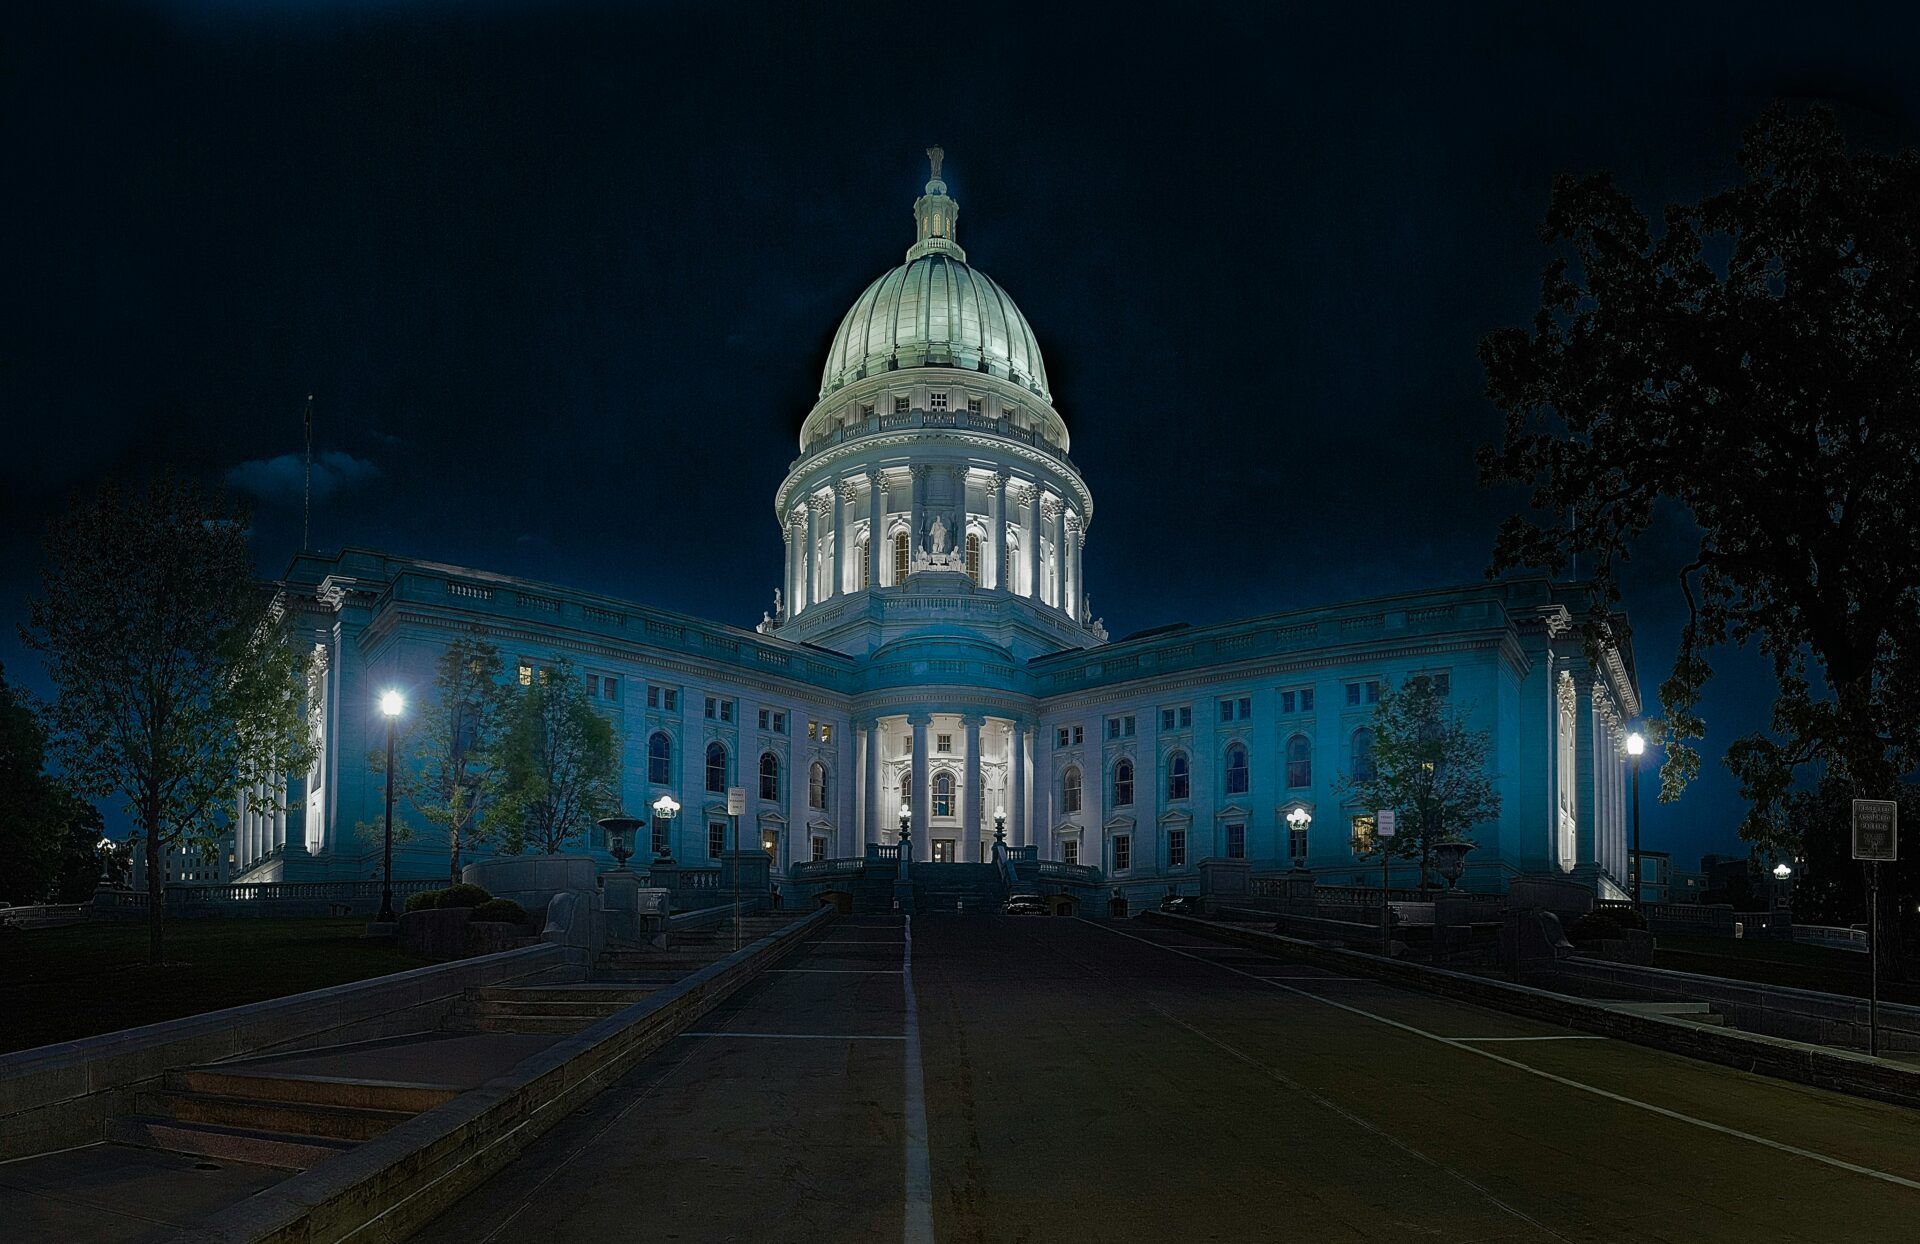 This is a 44 image HDR panoramic image of the Capitol building. This has been downsampled to 4k width so that it’s not stupidly large. I’m playing around with HDR panoramas at the moment and this one turned out pretty well.